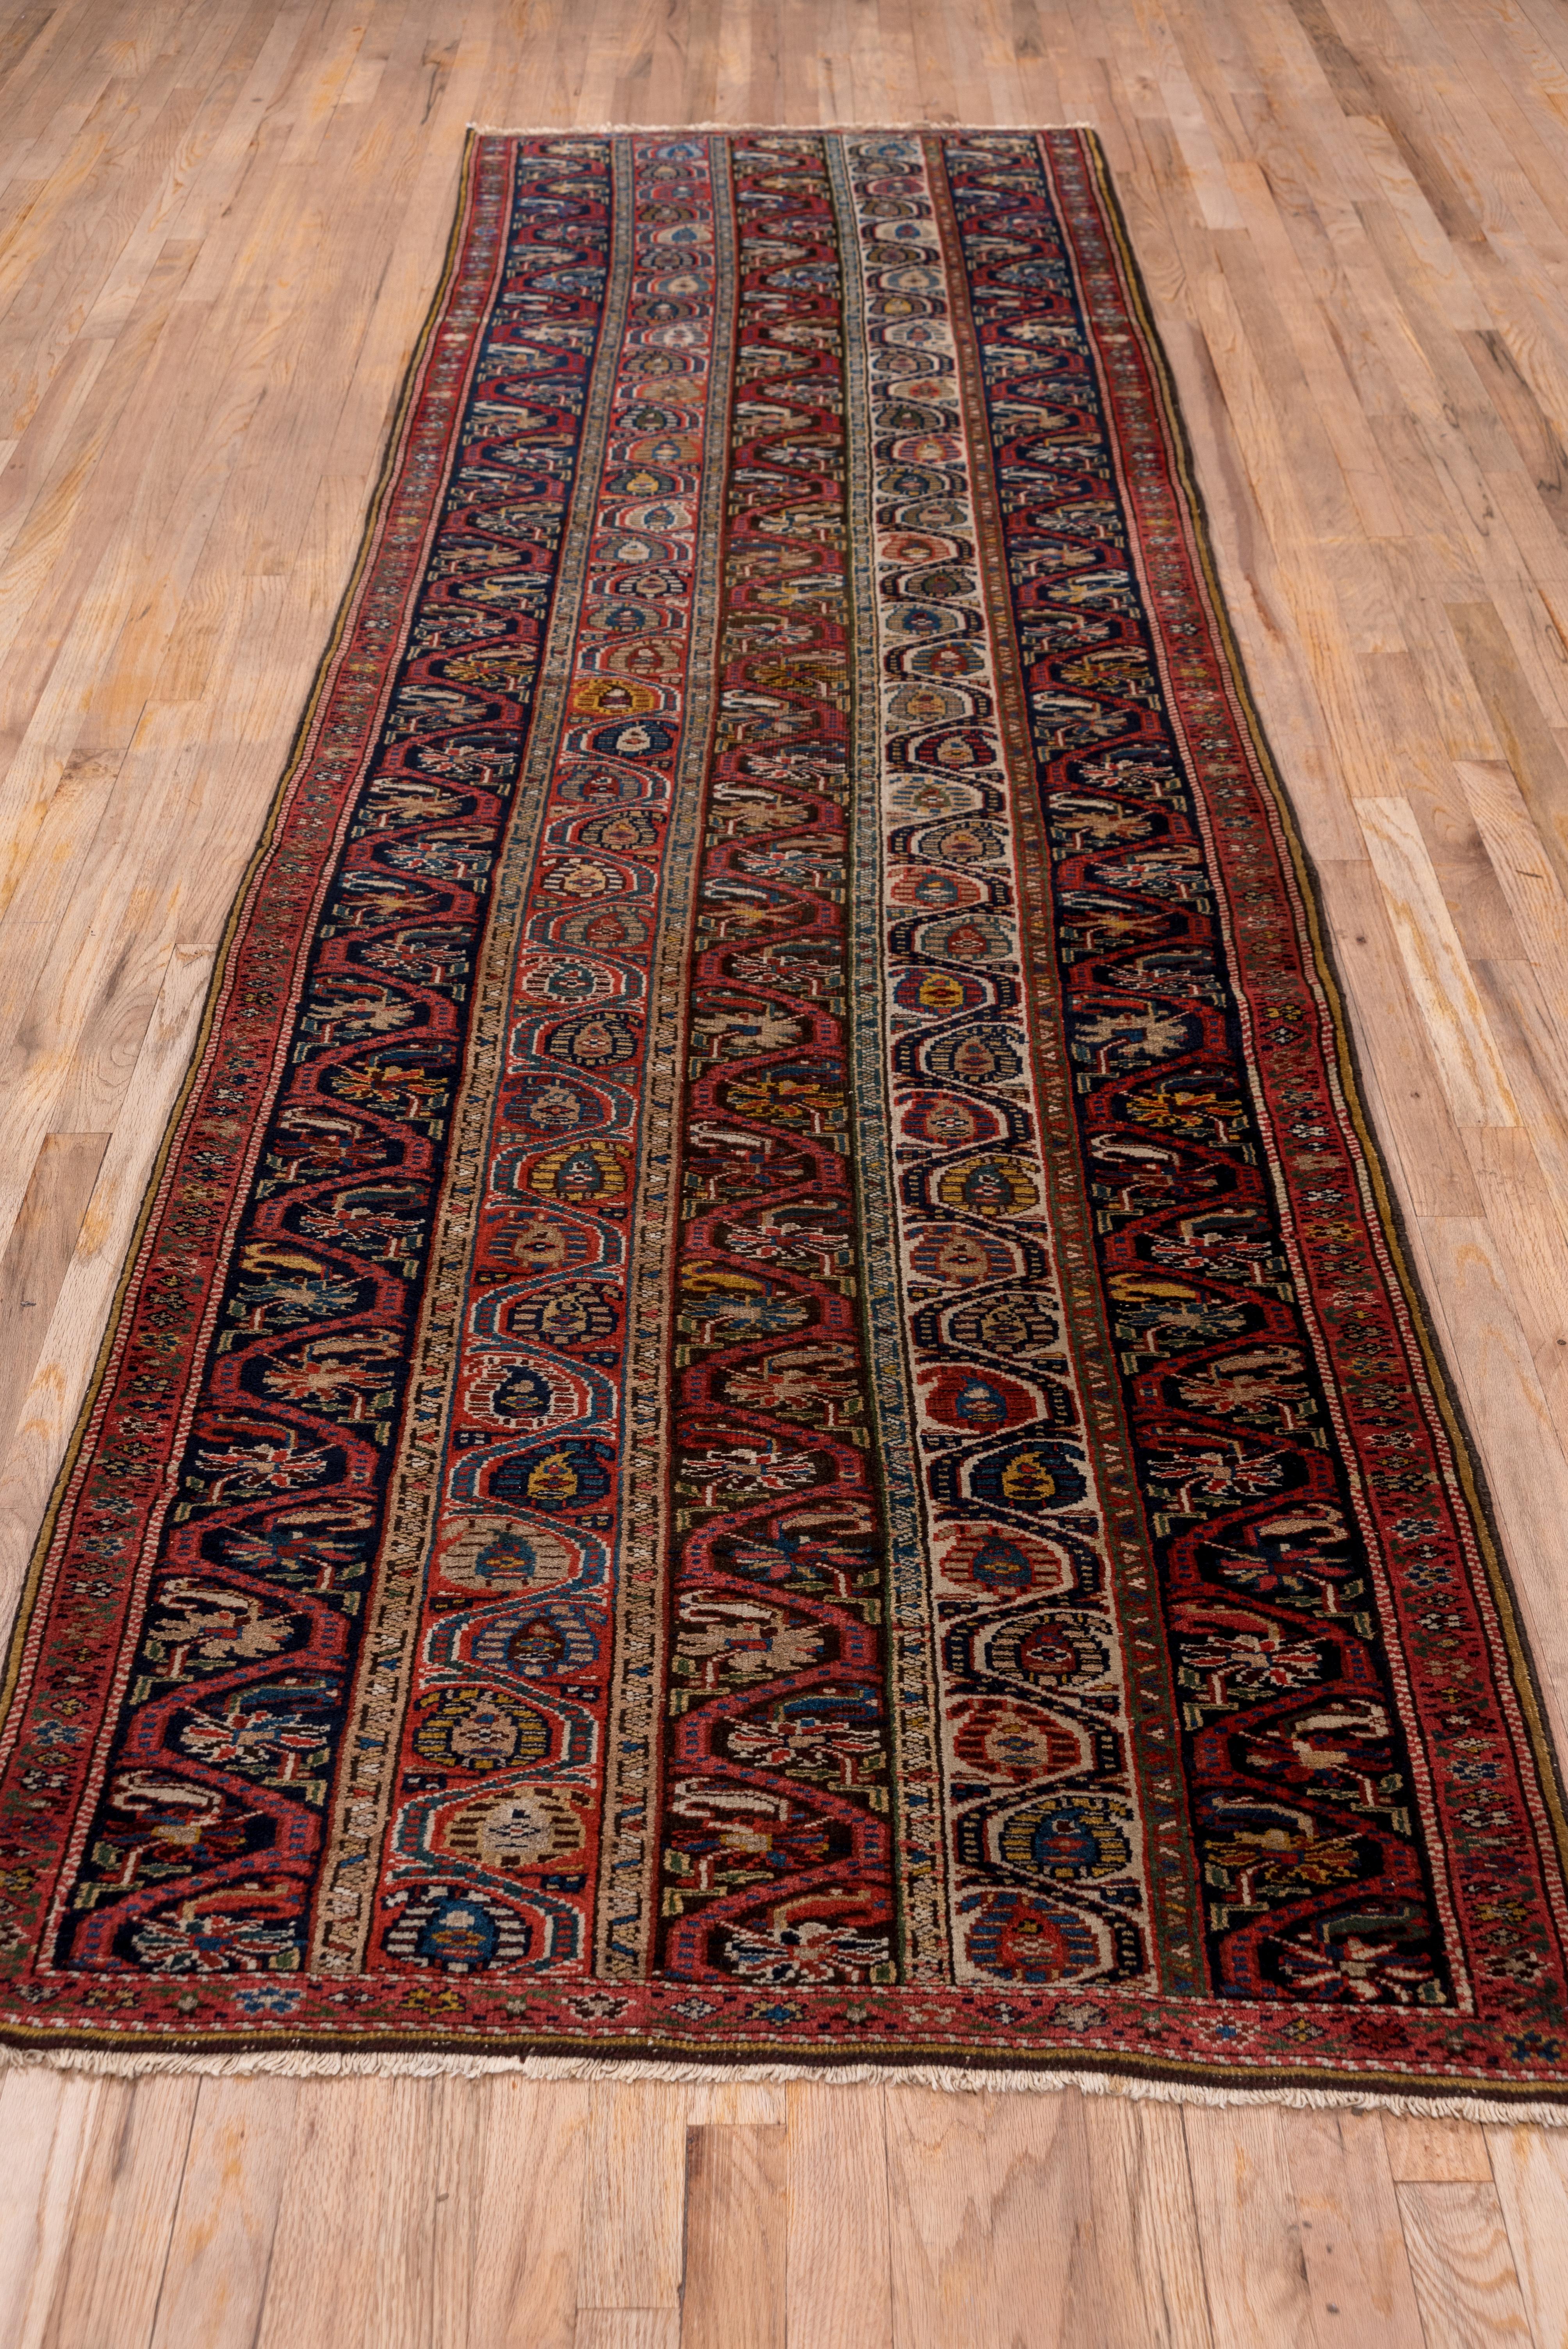 In the Caucasian style, this Kurdish Persian runner displays five columns strips in navy, red and ivory featuring bottehs and palmettes within undulating vines. The colors are rich and all natural, the weave is rock solid and board-like, and the